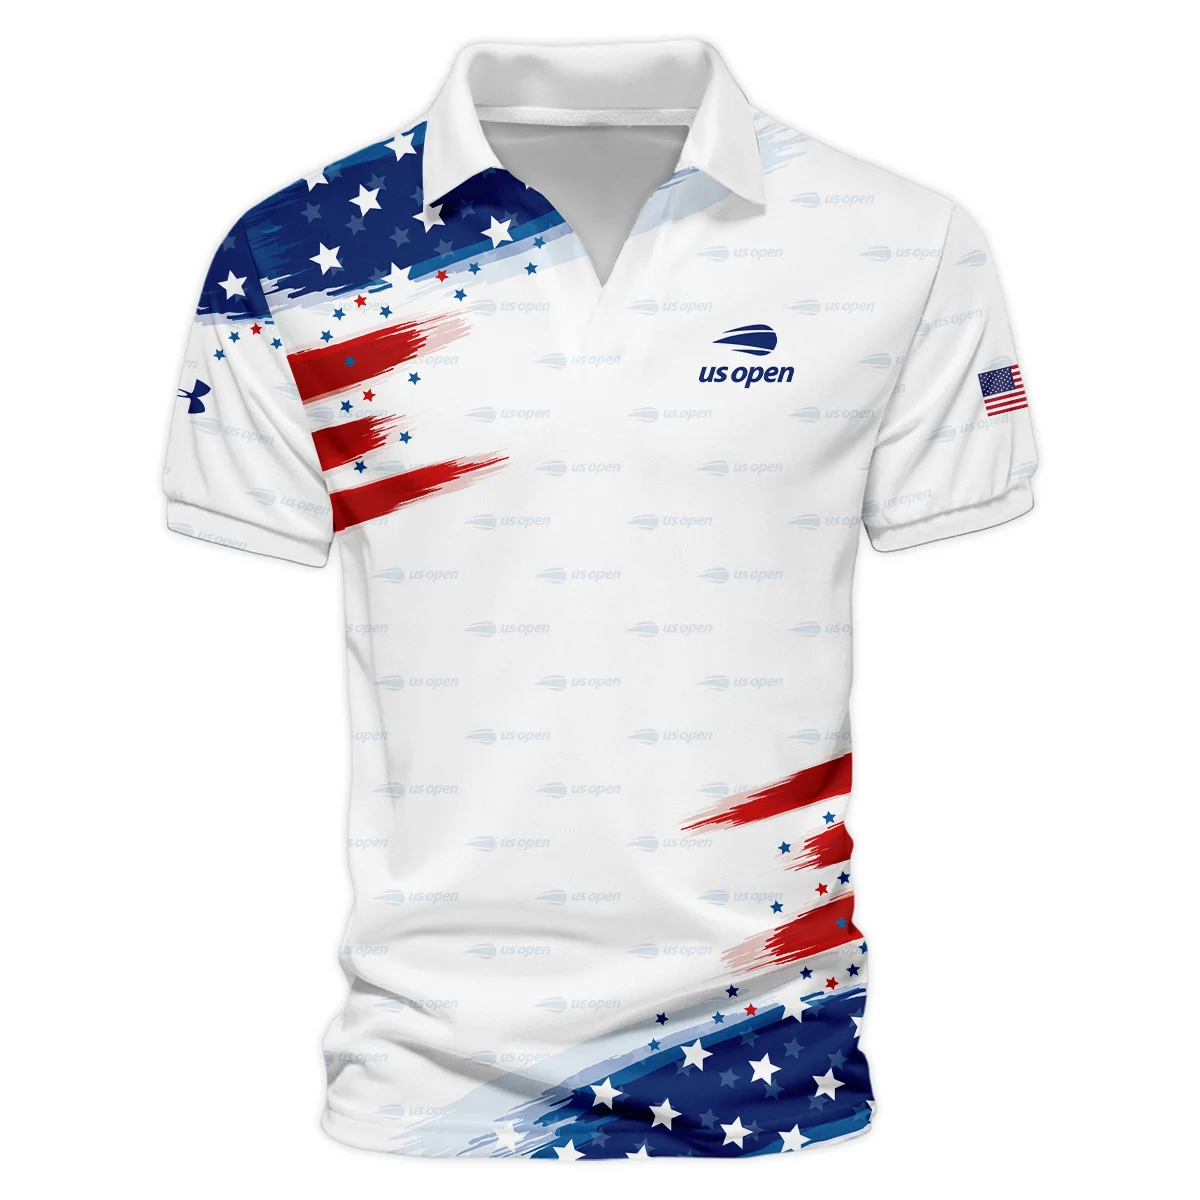 Tennis Love Sport Mix Color US Open Tennis Champions Under Armour Vneck Polo Shirt Style Classic Polo Shirt For Men